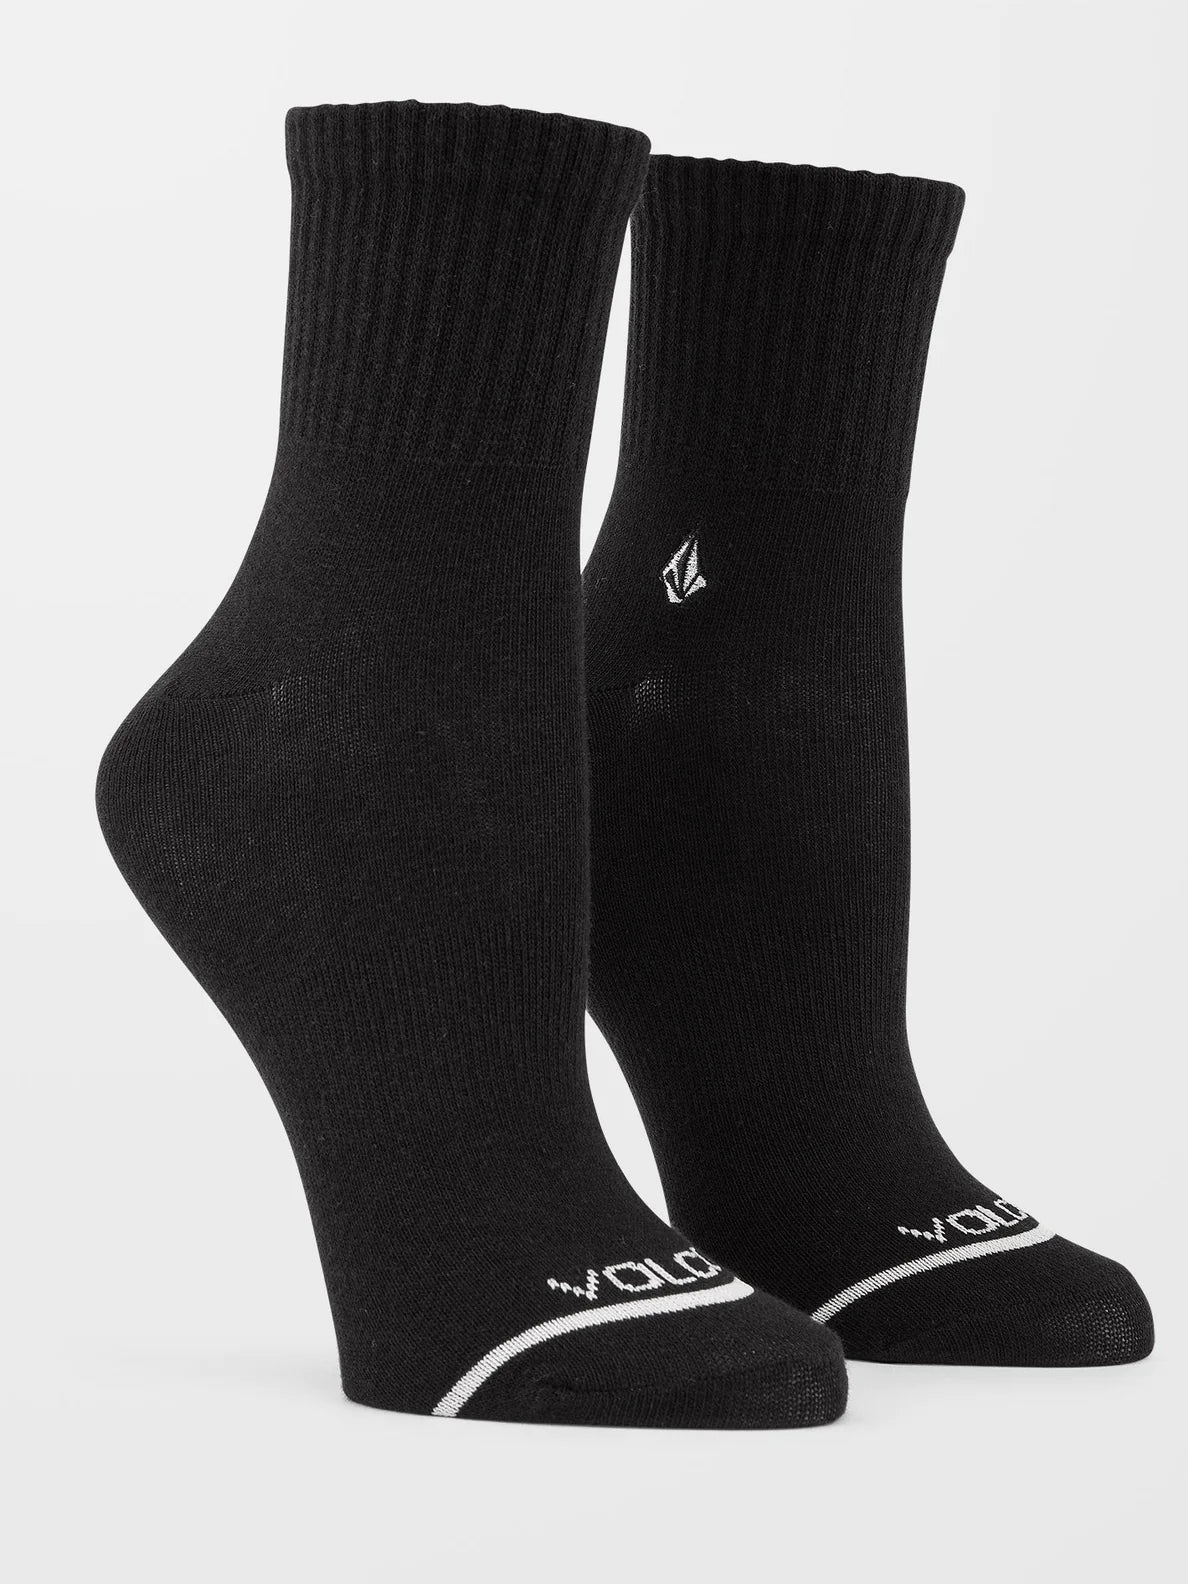 Calcetines Mujer Volcom The New Crew - Multi (Pack 3) | surfdevils.com